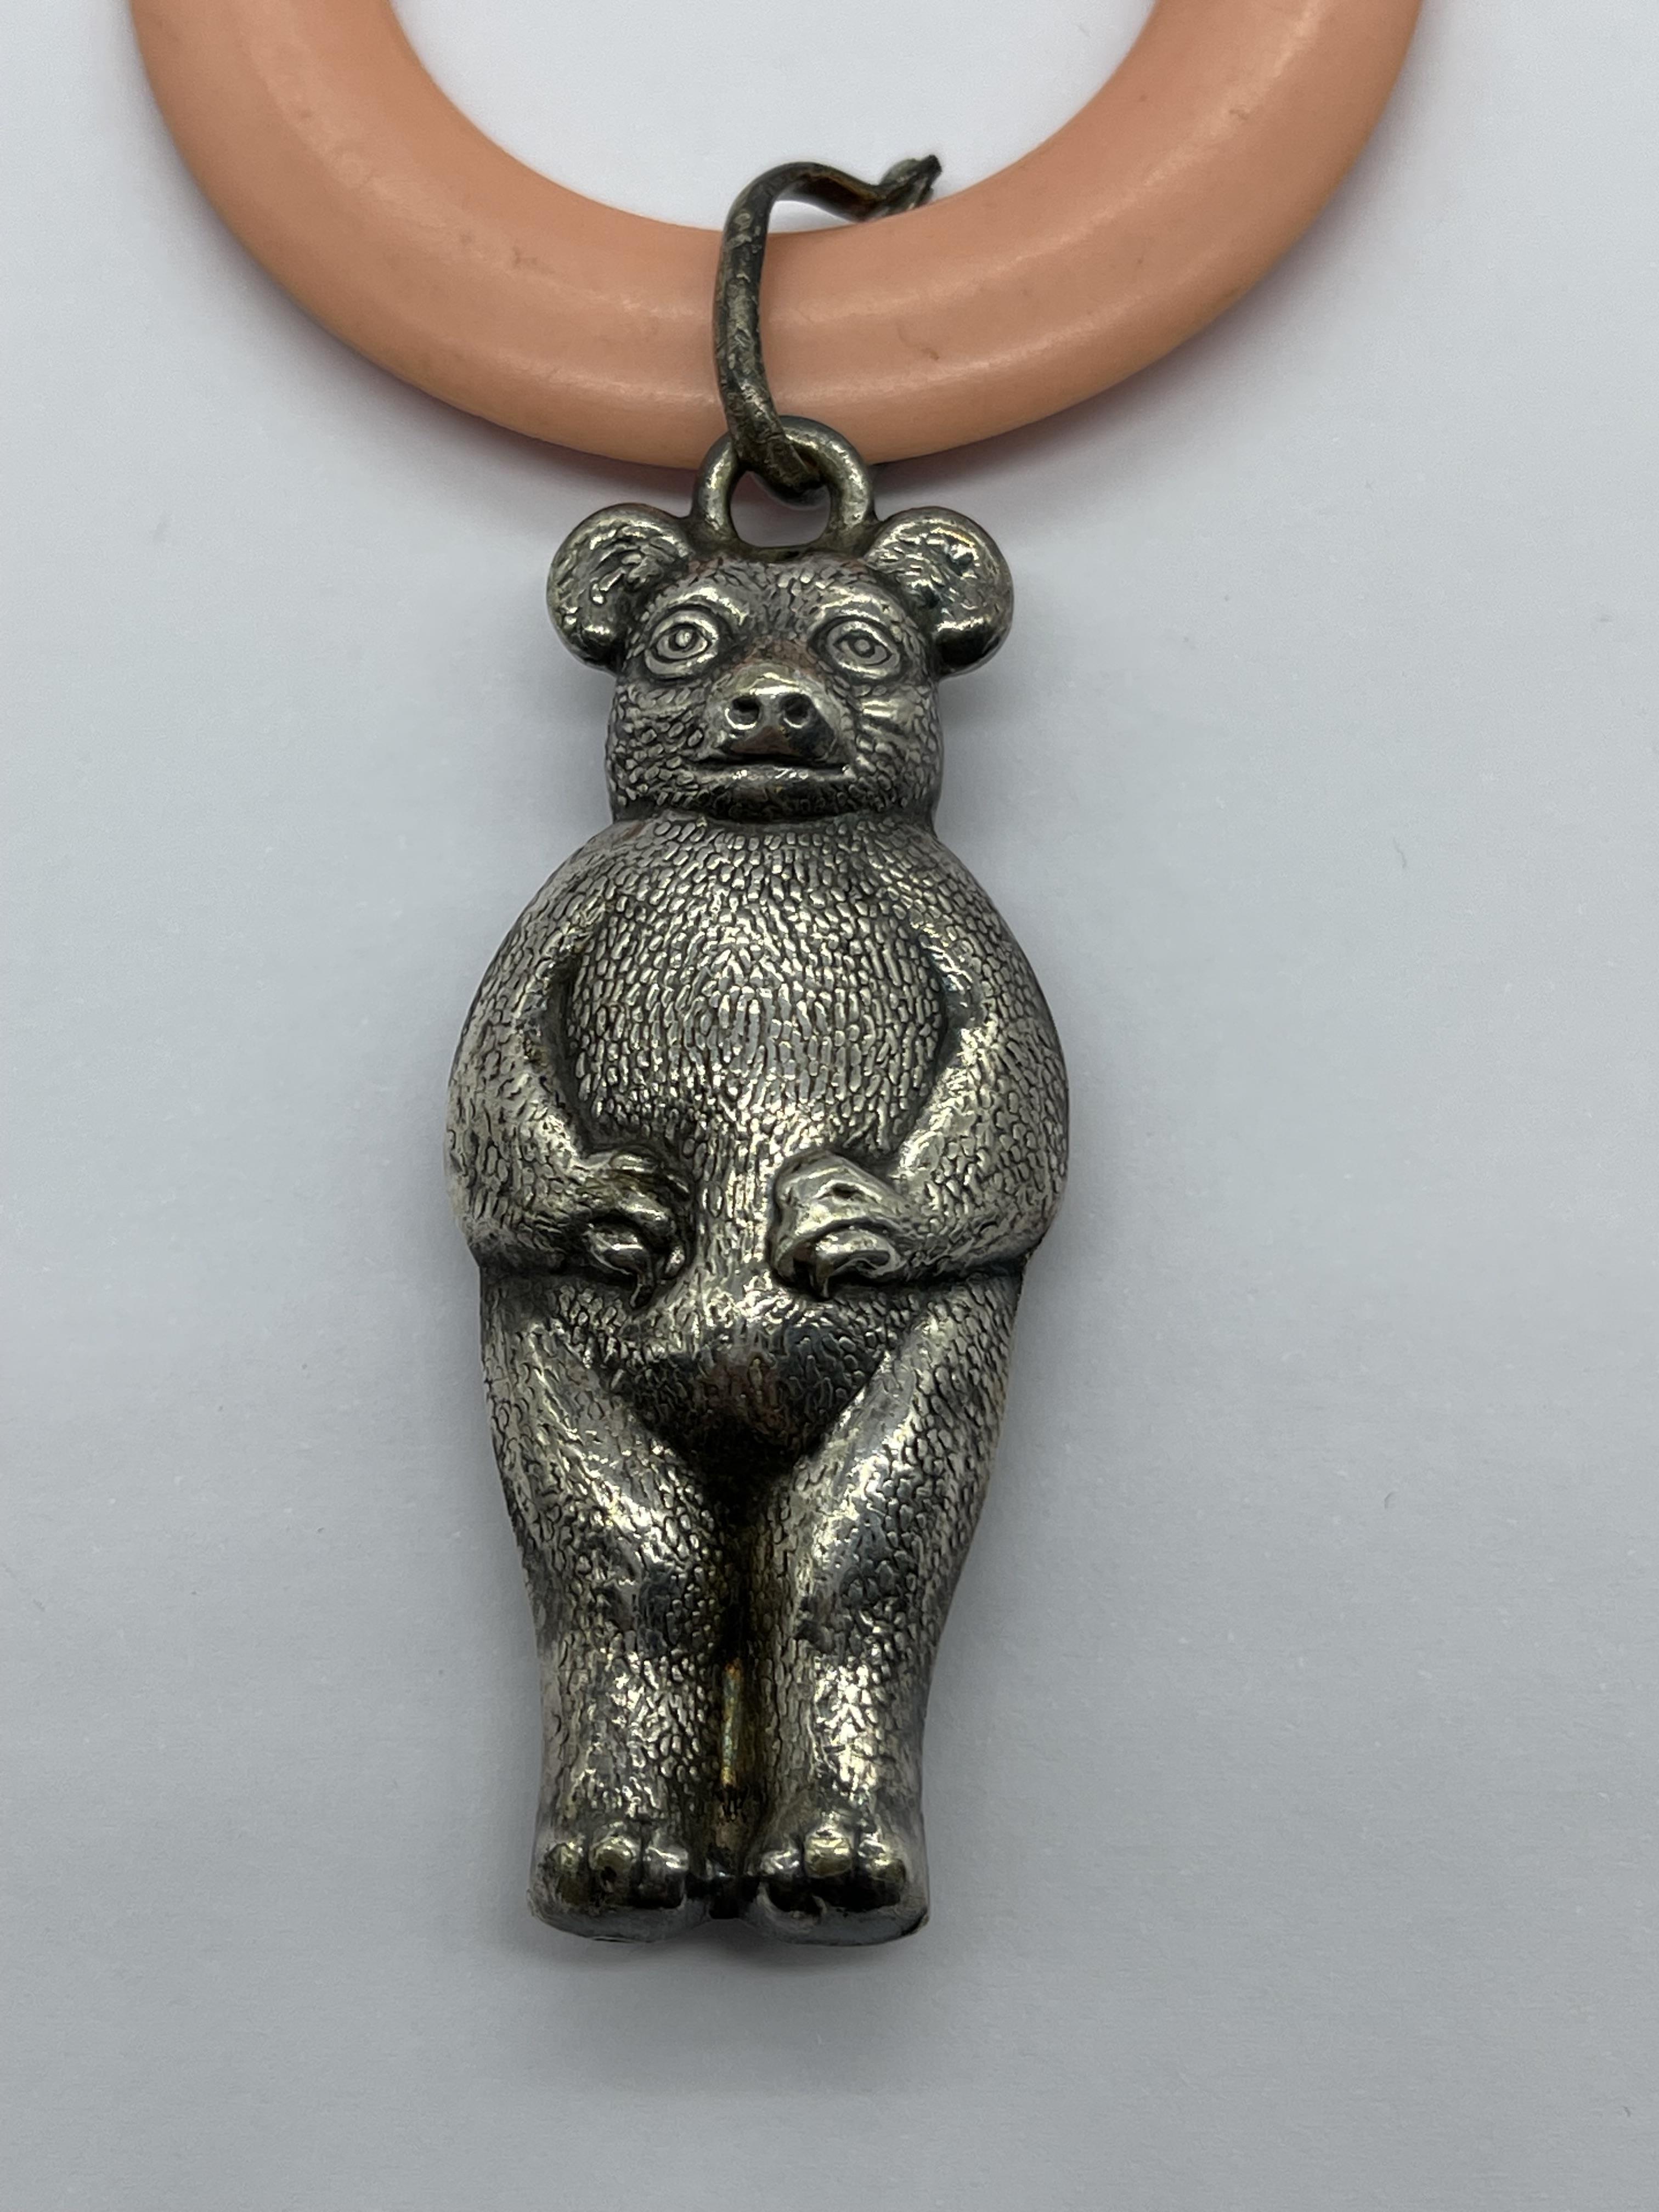 Antique Silver Plated Teddy Bear Baby Rattle. - Image 2 of 6